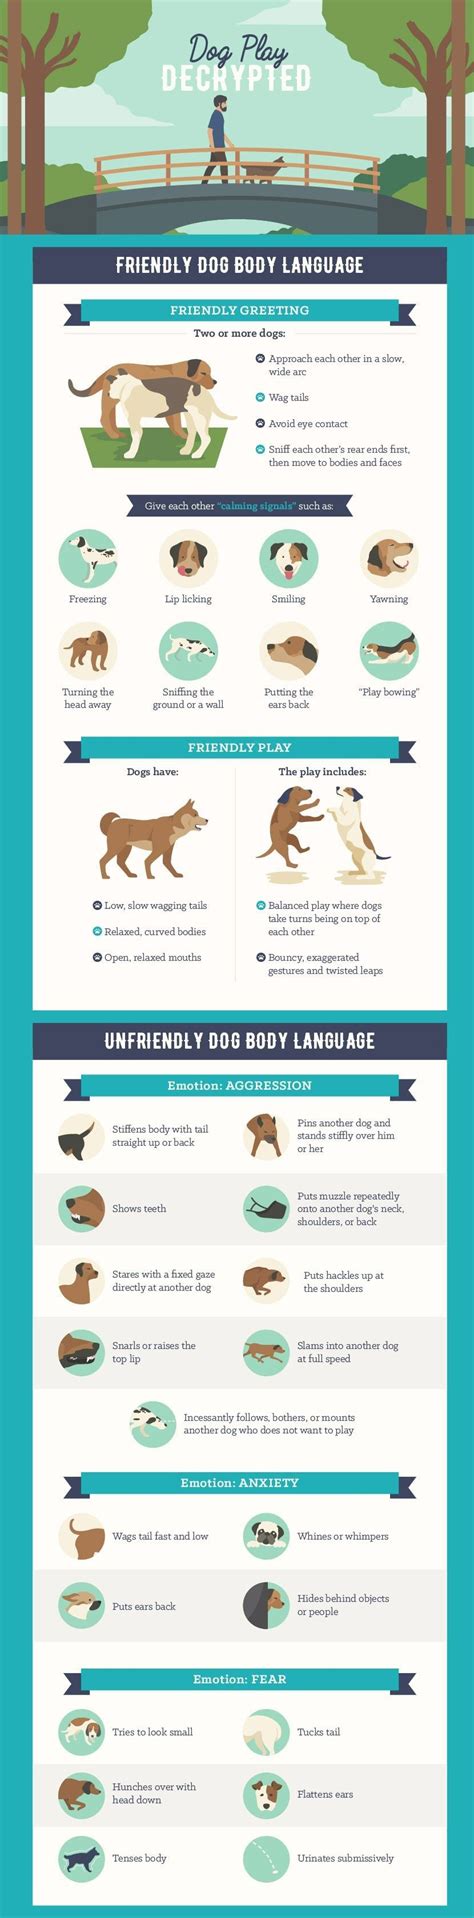 How To Understand Dog Play Visit Us Dog Body Language Dog Care Tips